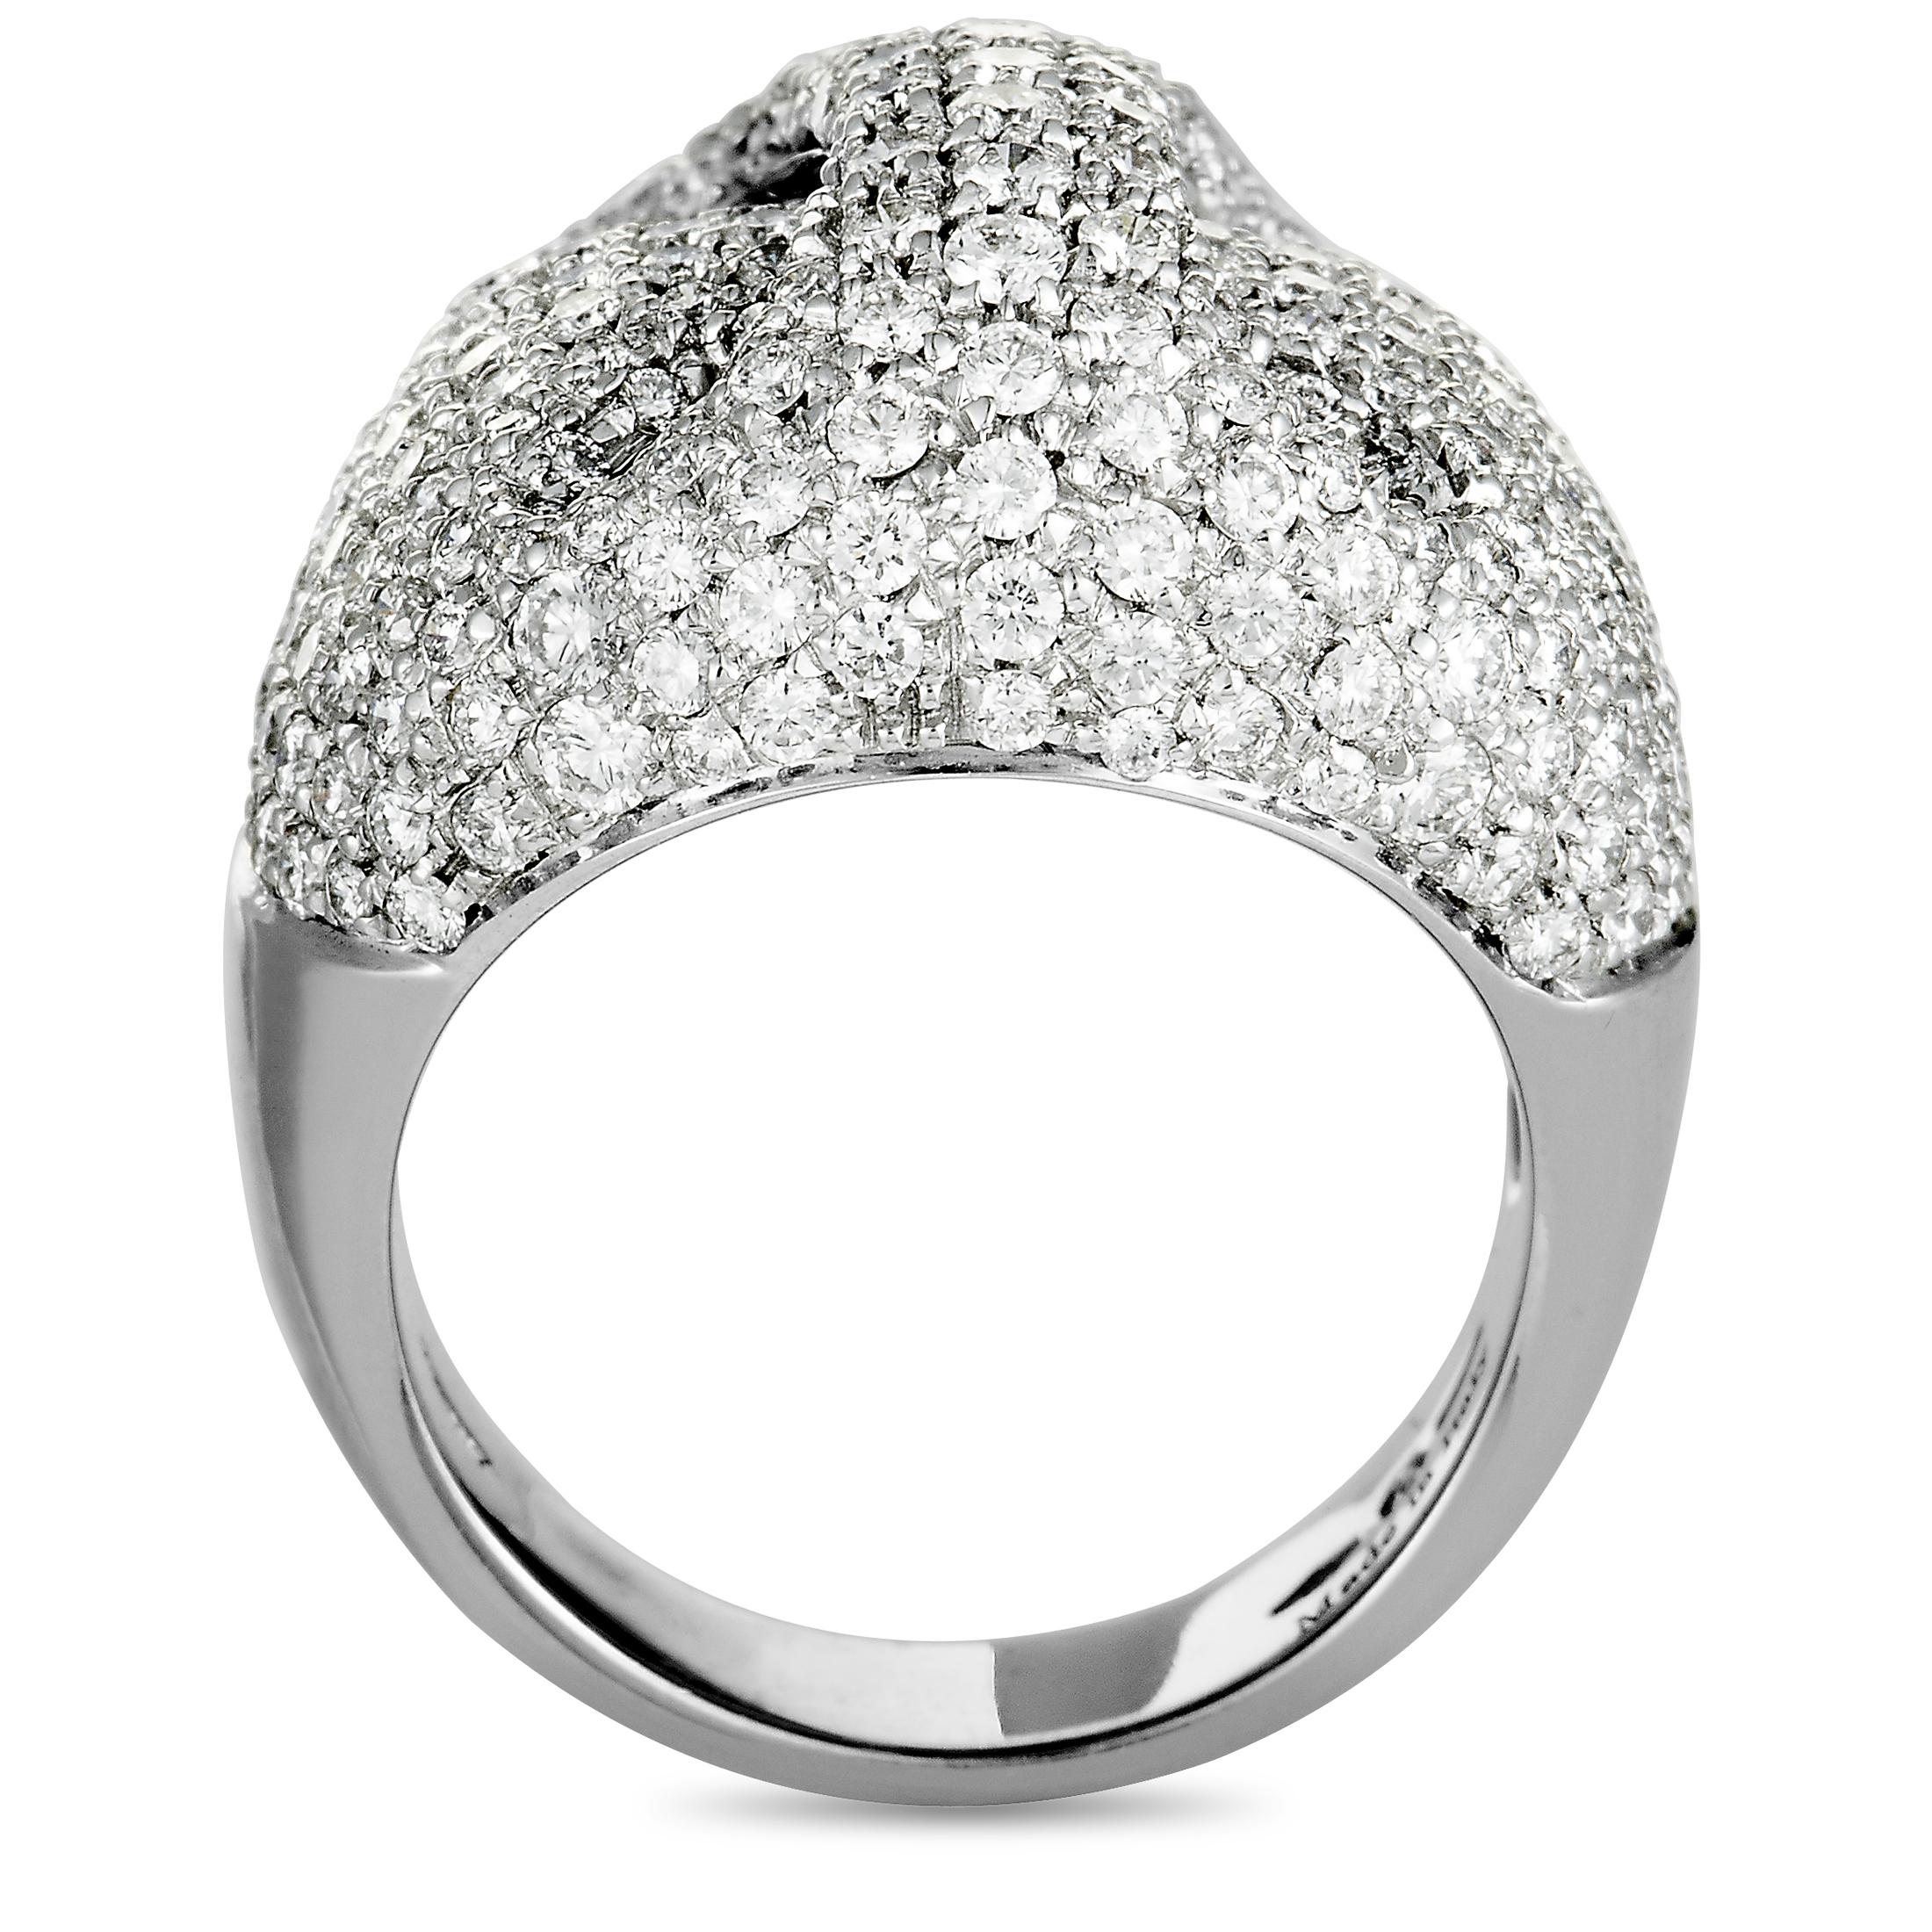 The Damiani ring is made of 18K white and weighs 17 grams, boasting band thickness of 5 mm and top height of 9 mm, while top dimensions measure 23 by 21 mm. The ring is set with diamonds that weigh 3.21 carats in total.
 
 Offered in brand new